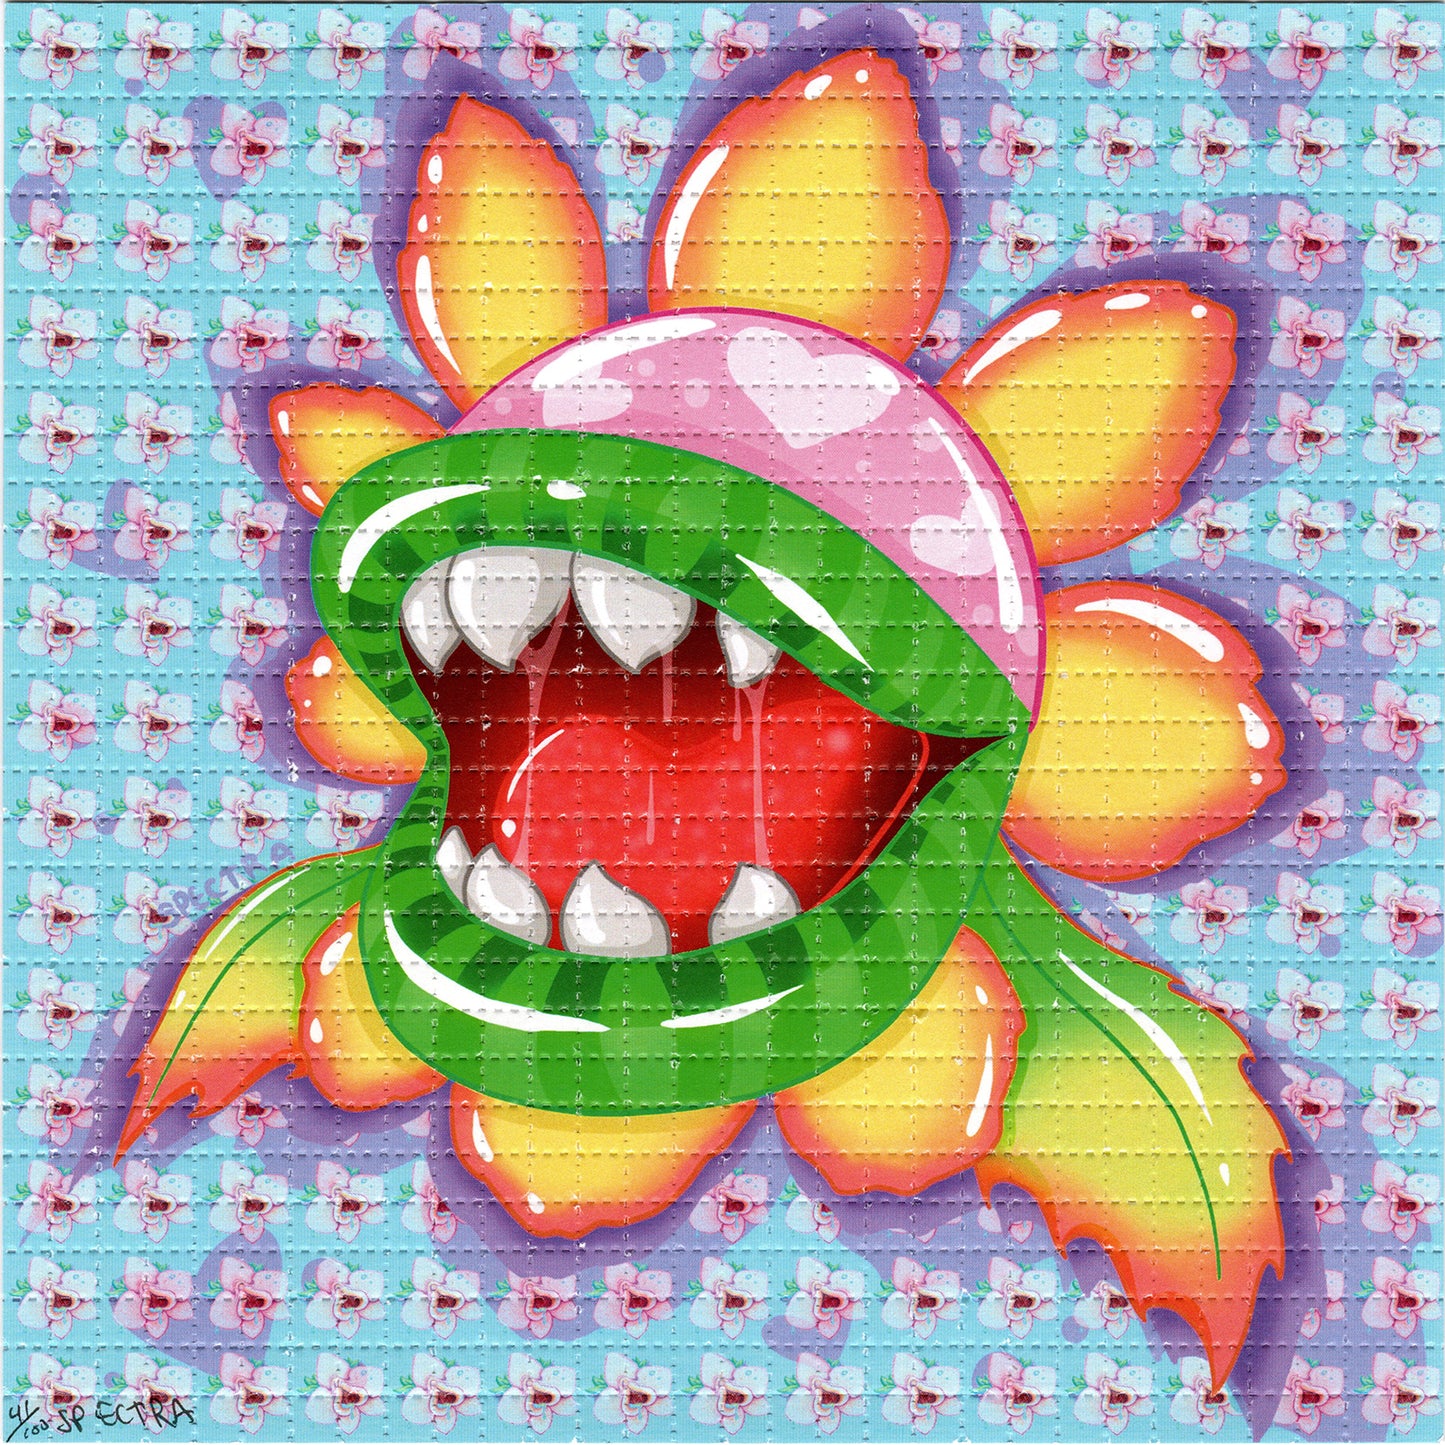 Feed Me by Tabitha Spectra SIGNED Limited Edition LSD blotter art print